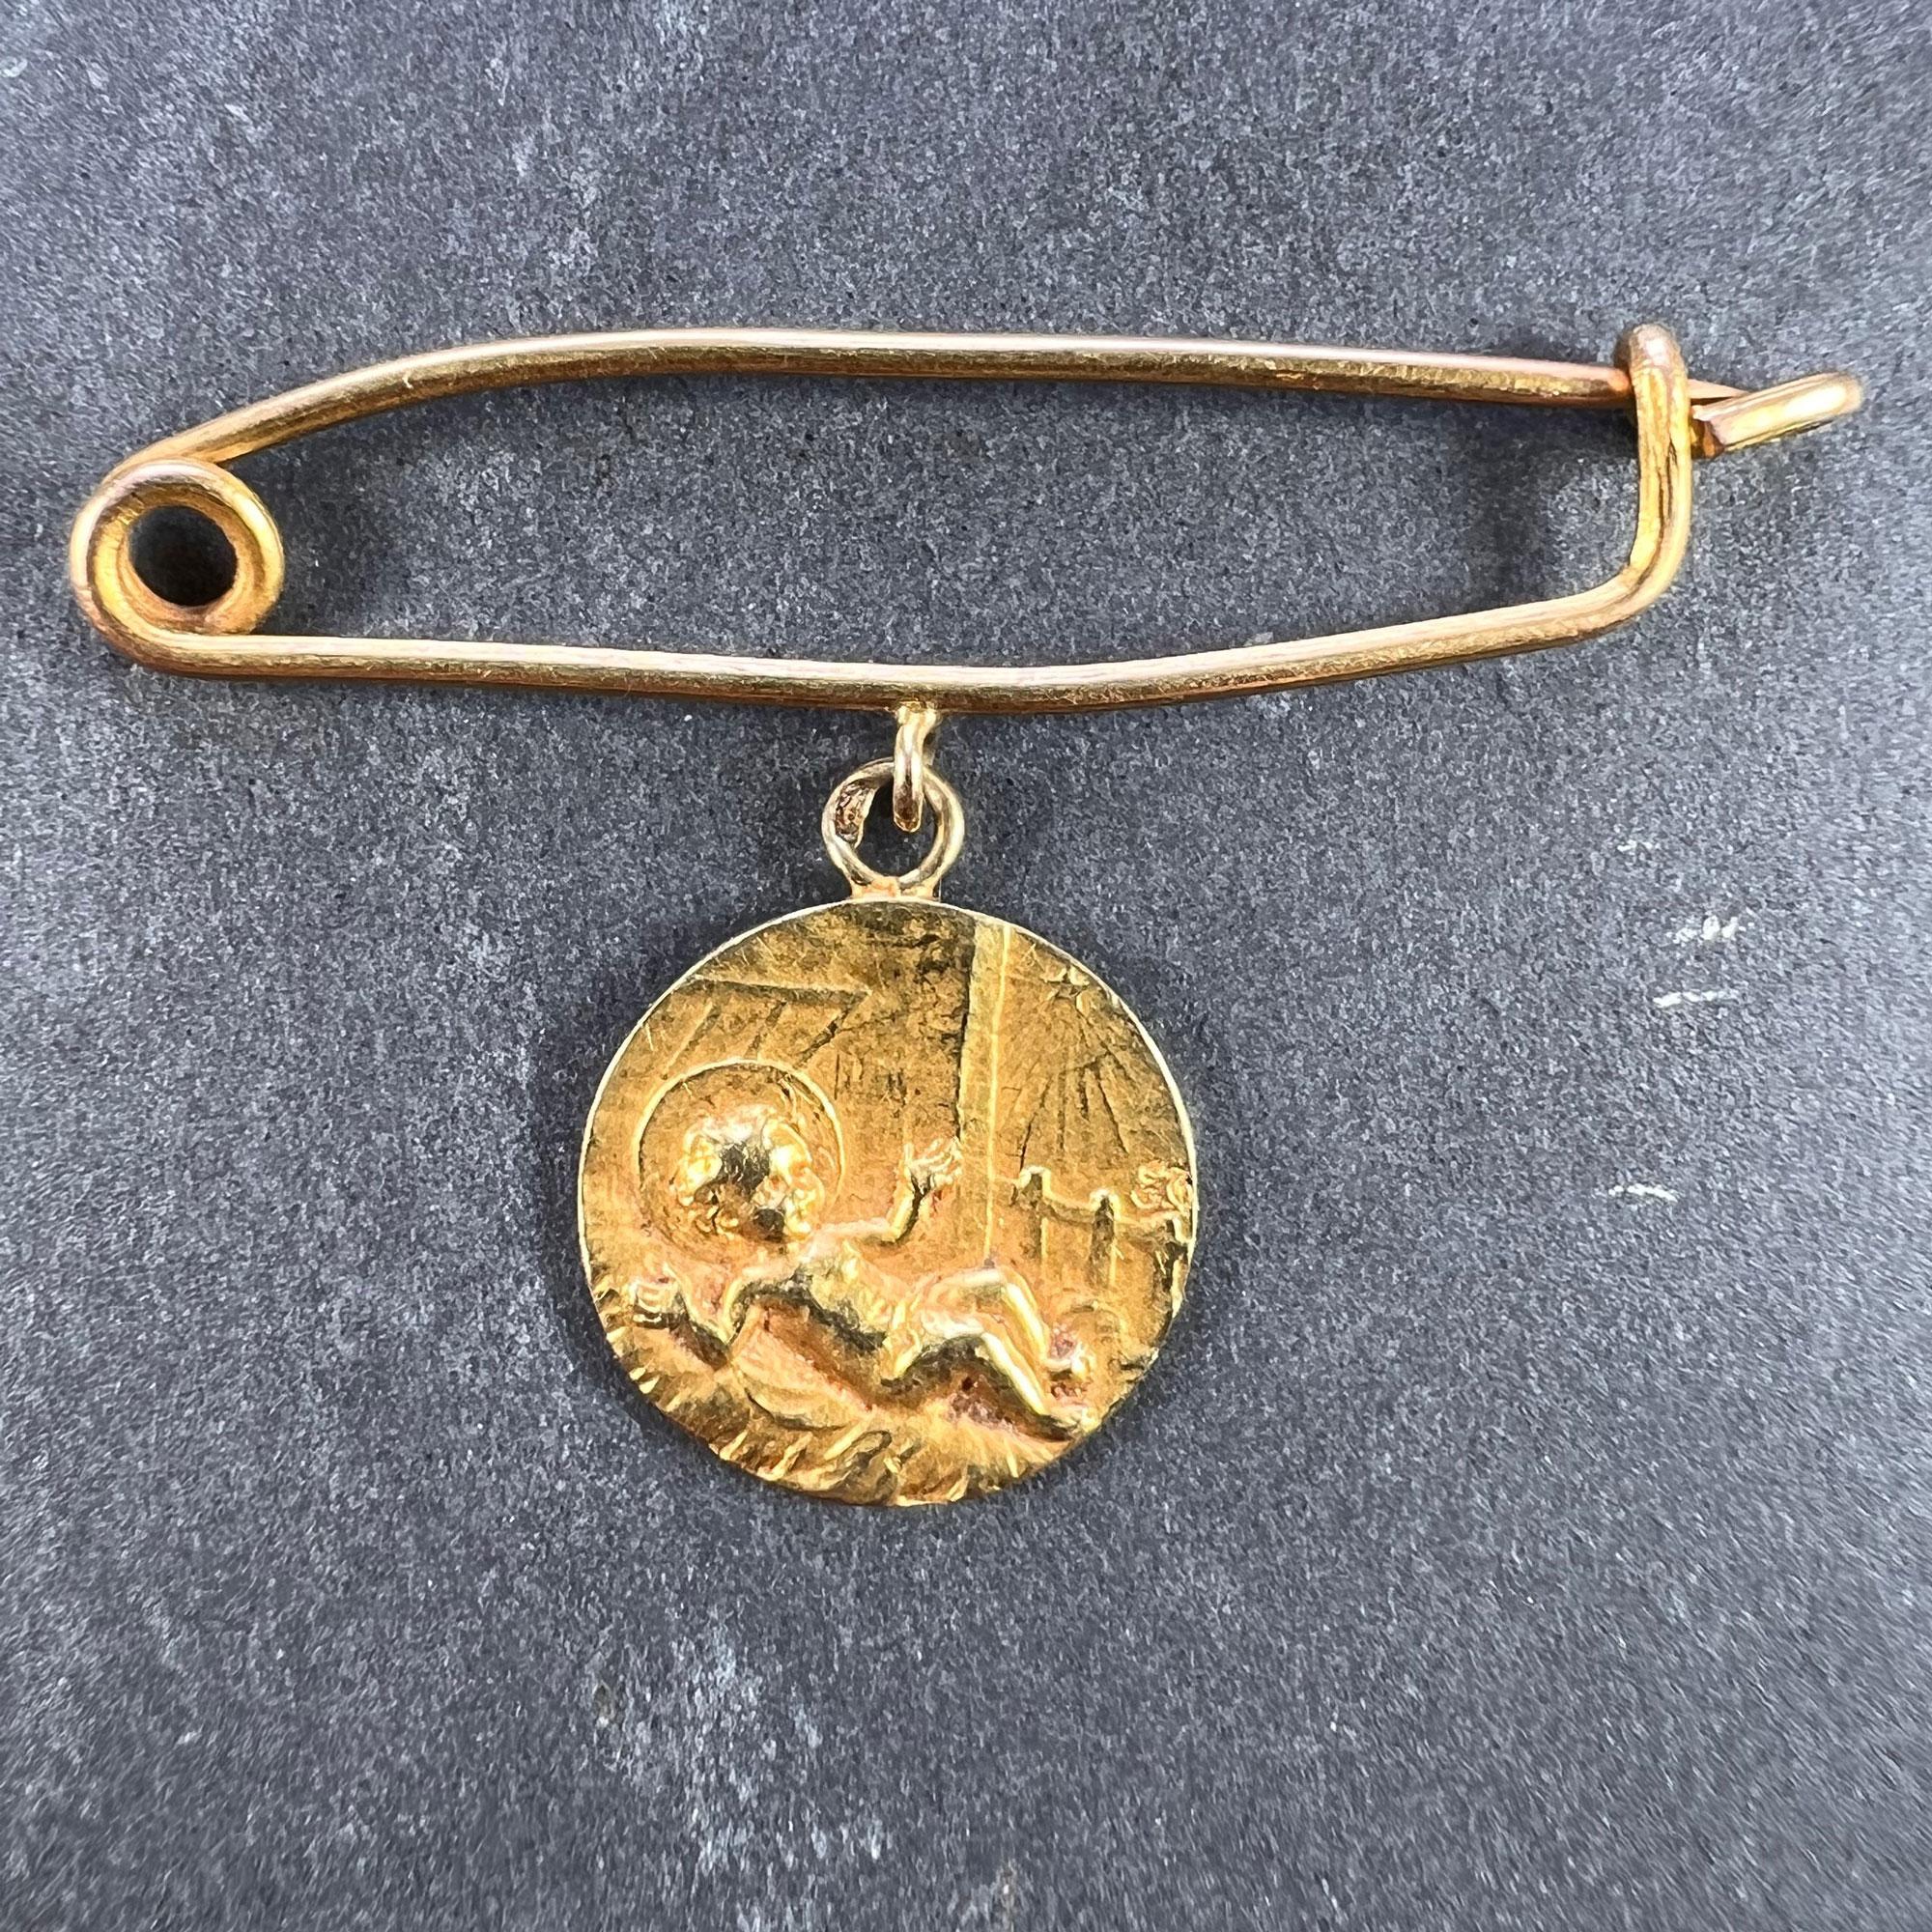 An 18 karat (18K) yellow gold charm pendant brooch of a medal depicting a baby in an infant’s crib with rays of light streaming down onto it from a star, suspended from a yellow gold nappy pin or safety pin. Stamped with the eagle’s head for French